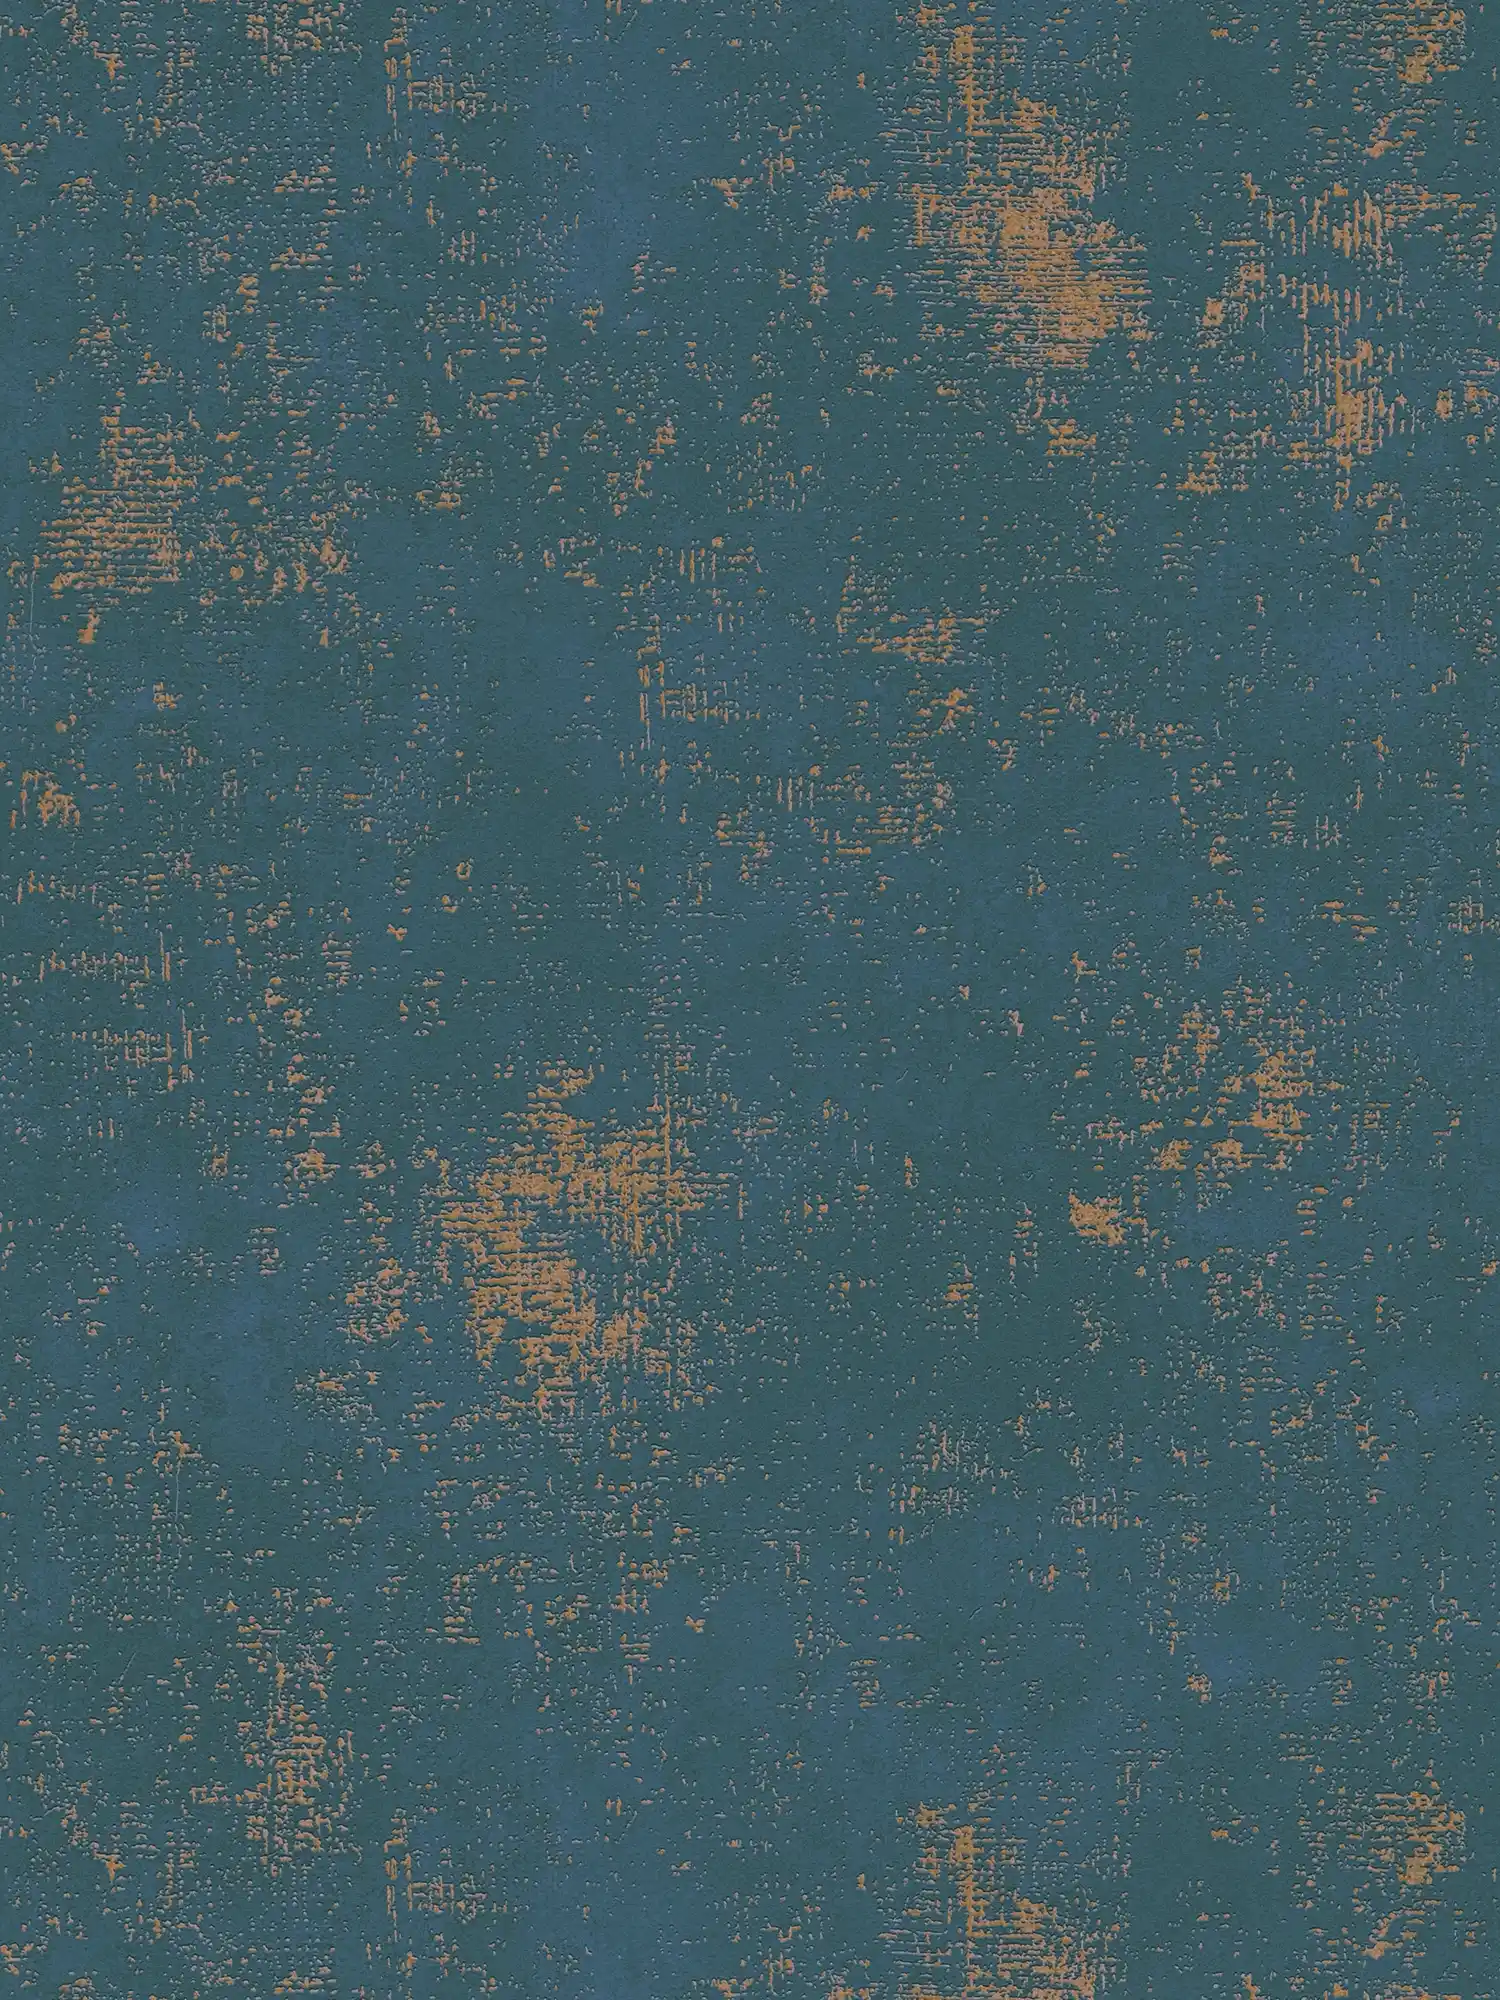 Blue wallpaper with gold metallic accent and texture details
